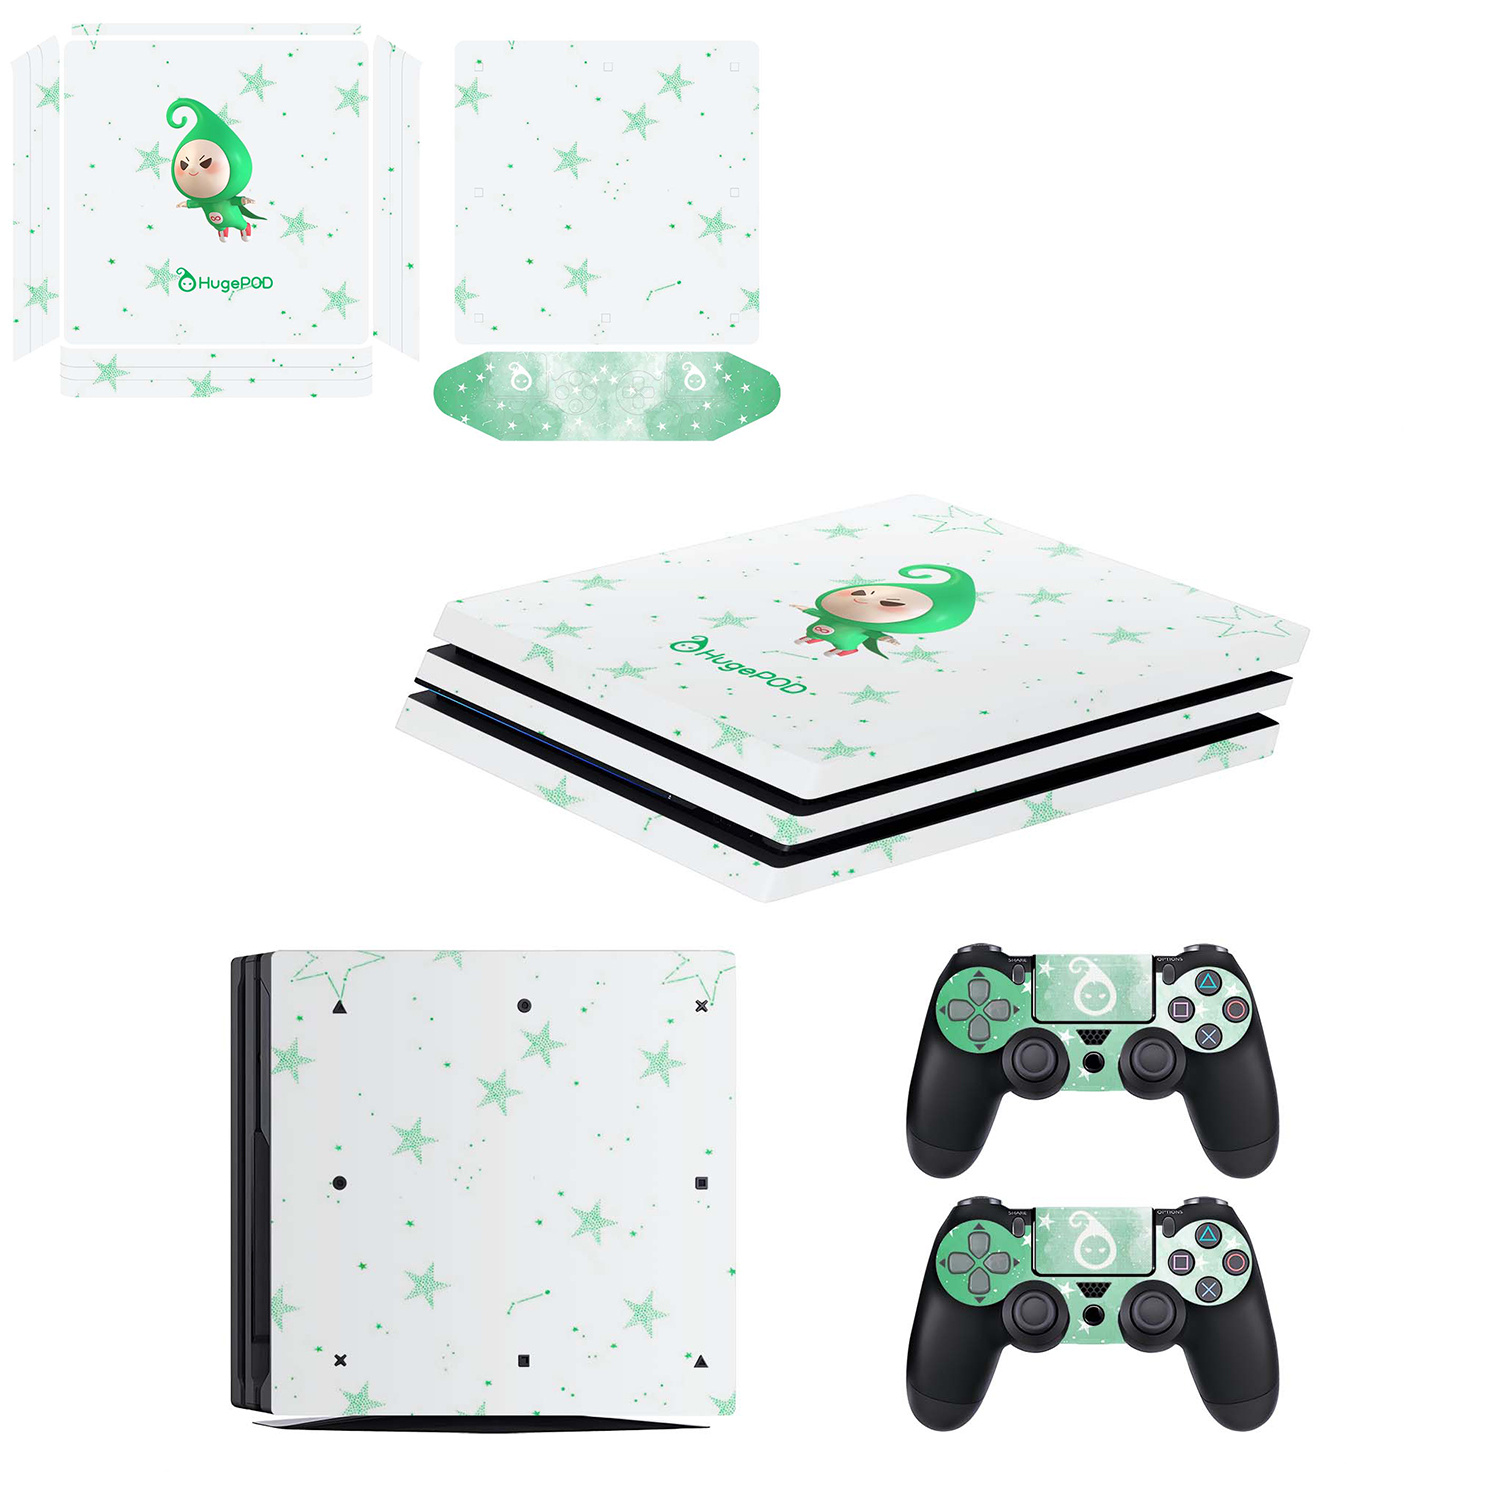 Stickers Compatible With PS4 Slim | HugePOD